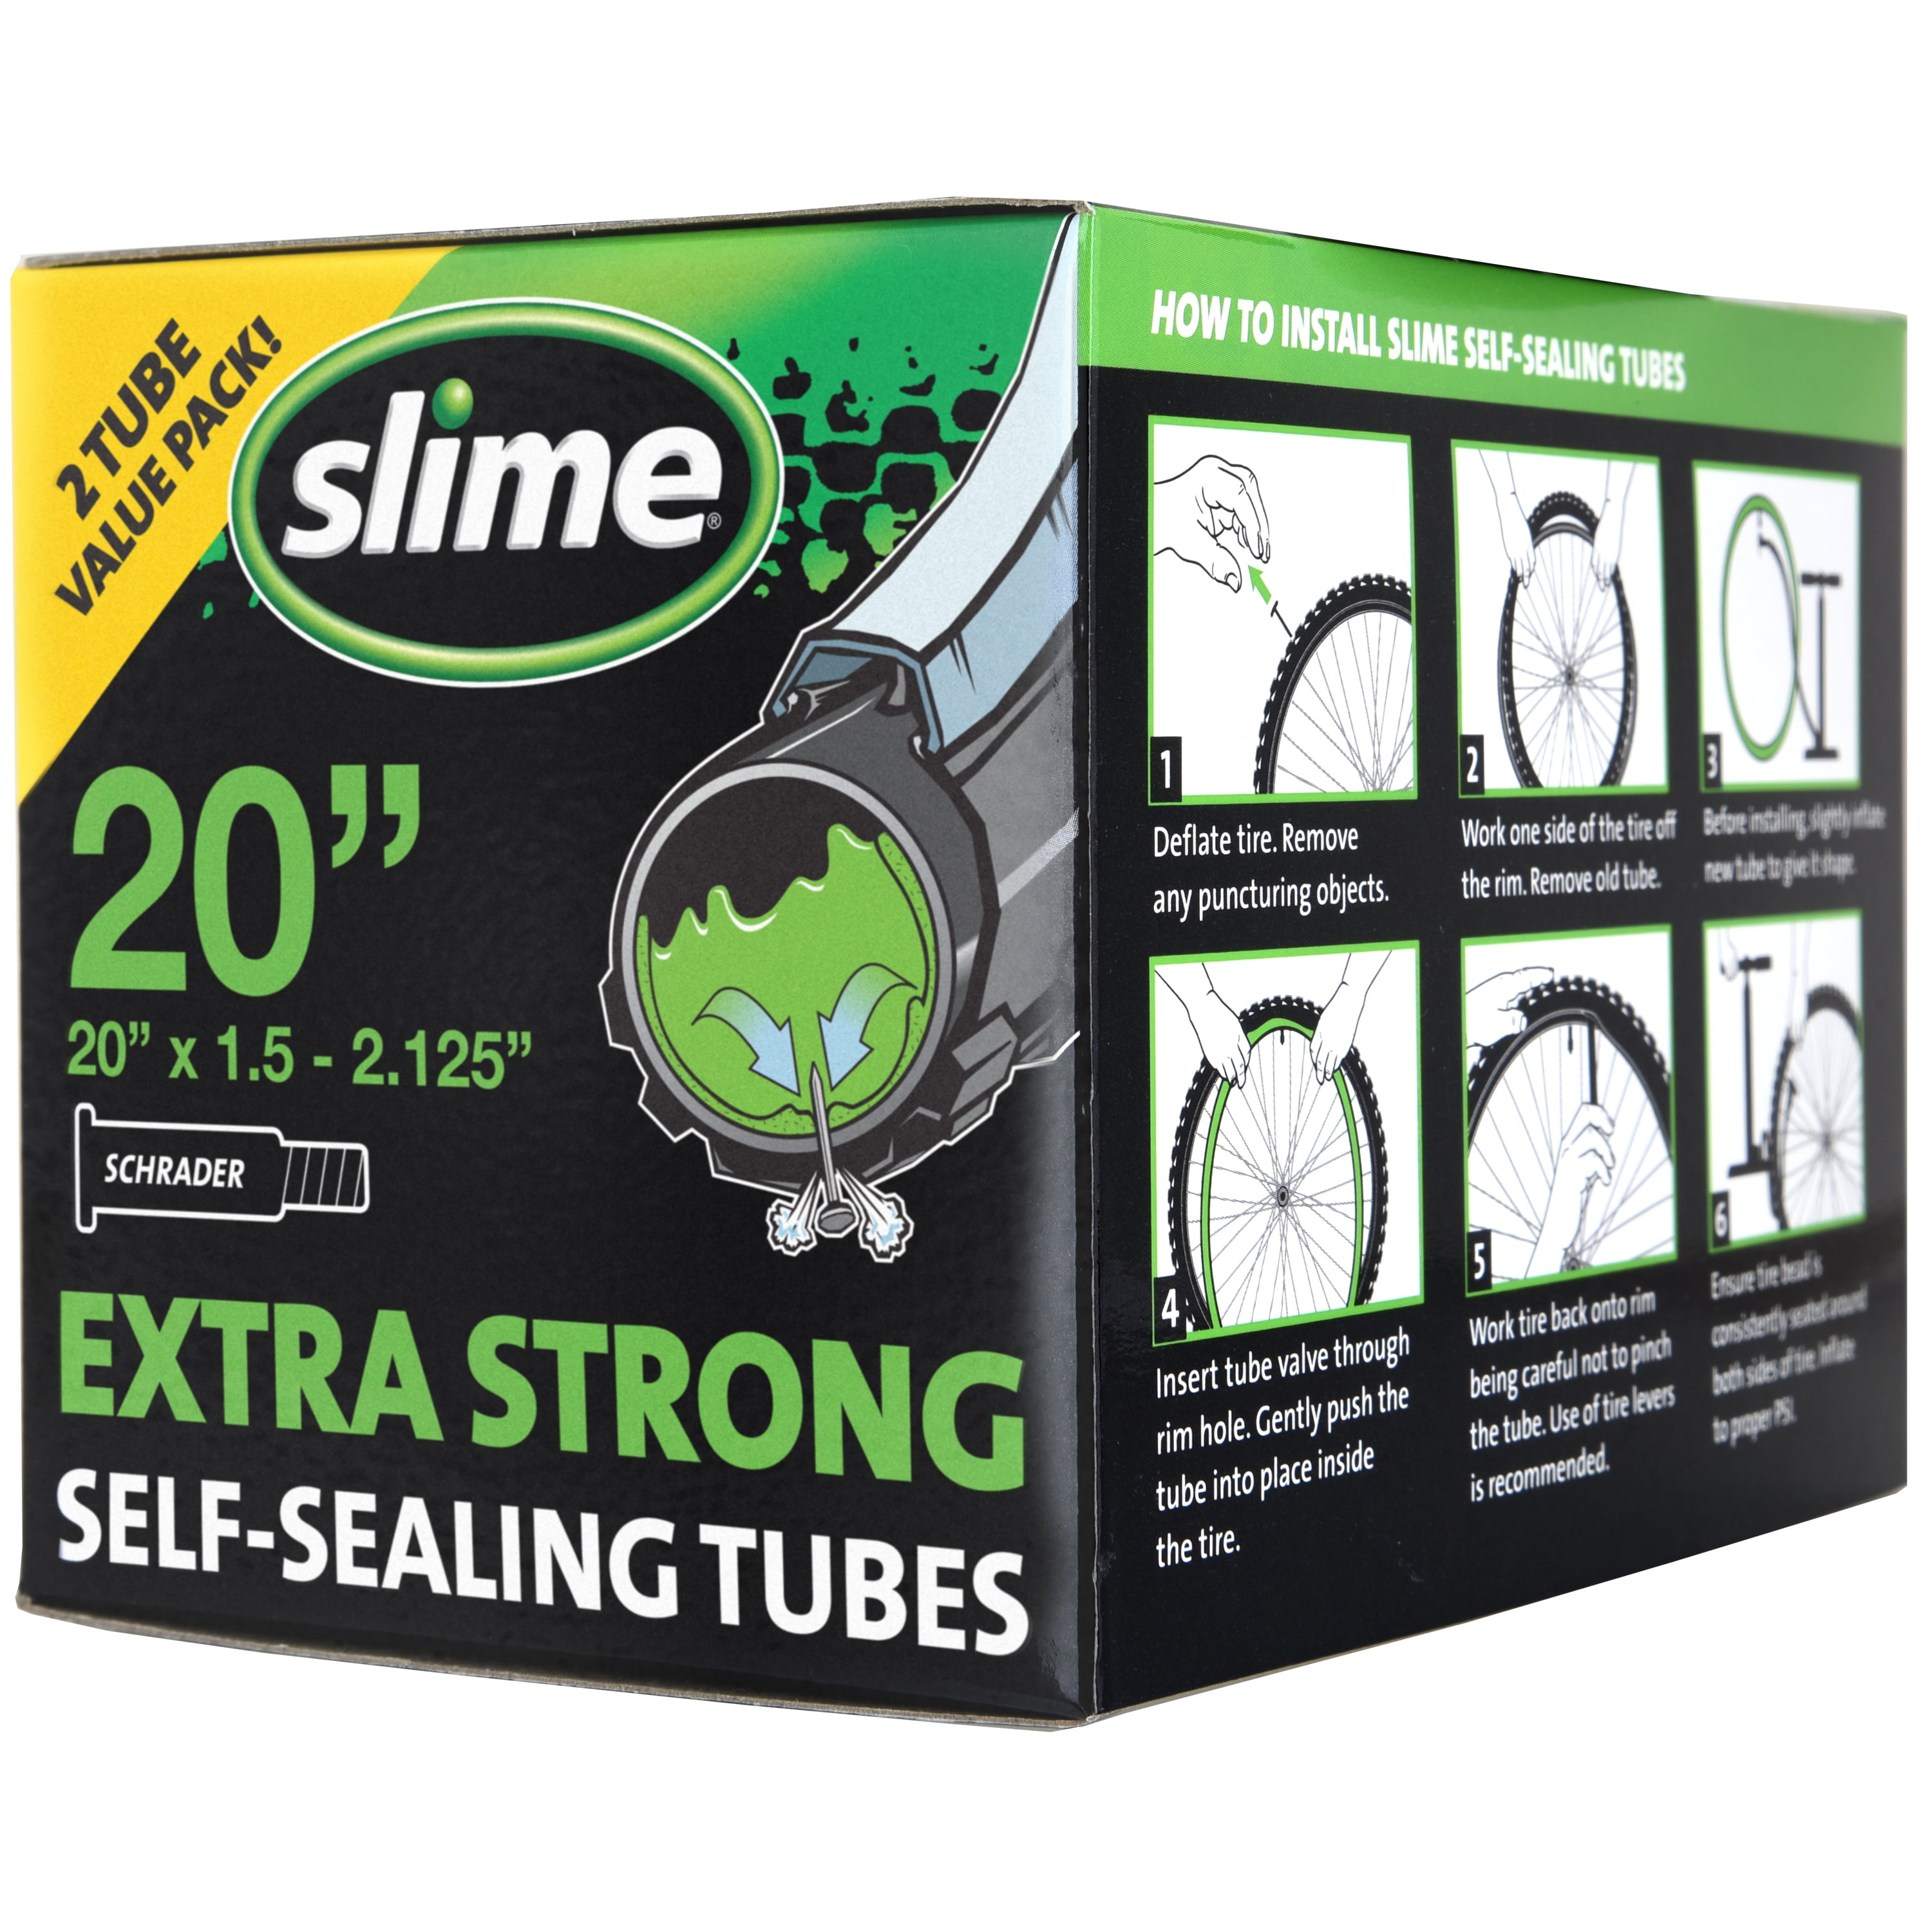 Slime Extra Strong Self-Sealing Bicycle Tube Schrader 20" x 1.5-2.125" 2 Pack - 30075